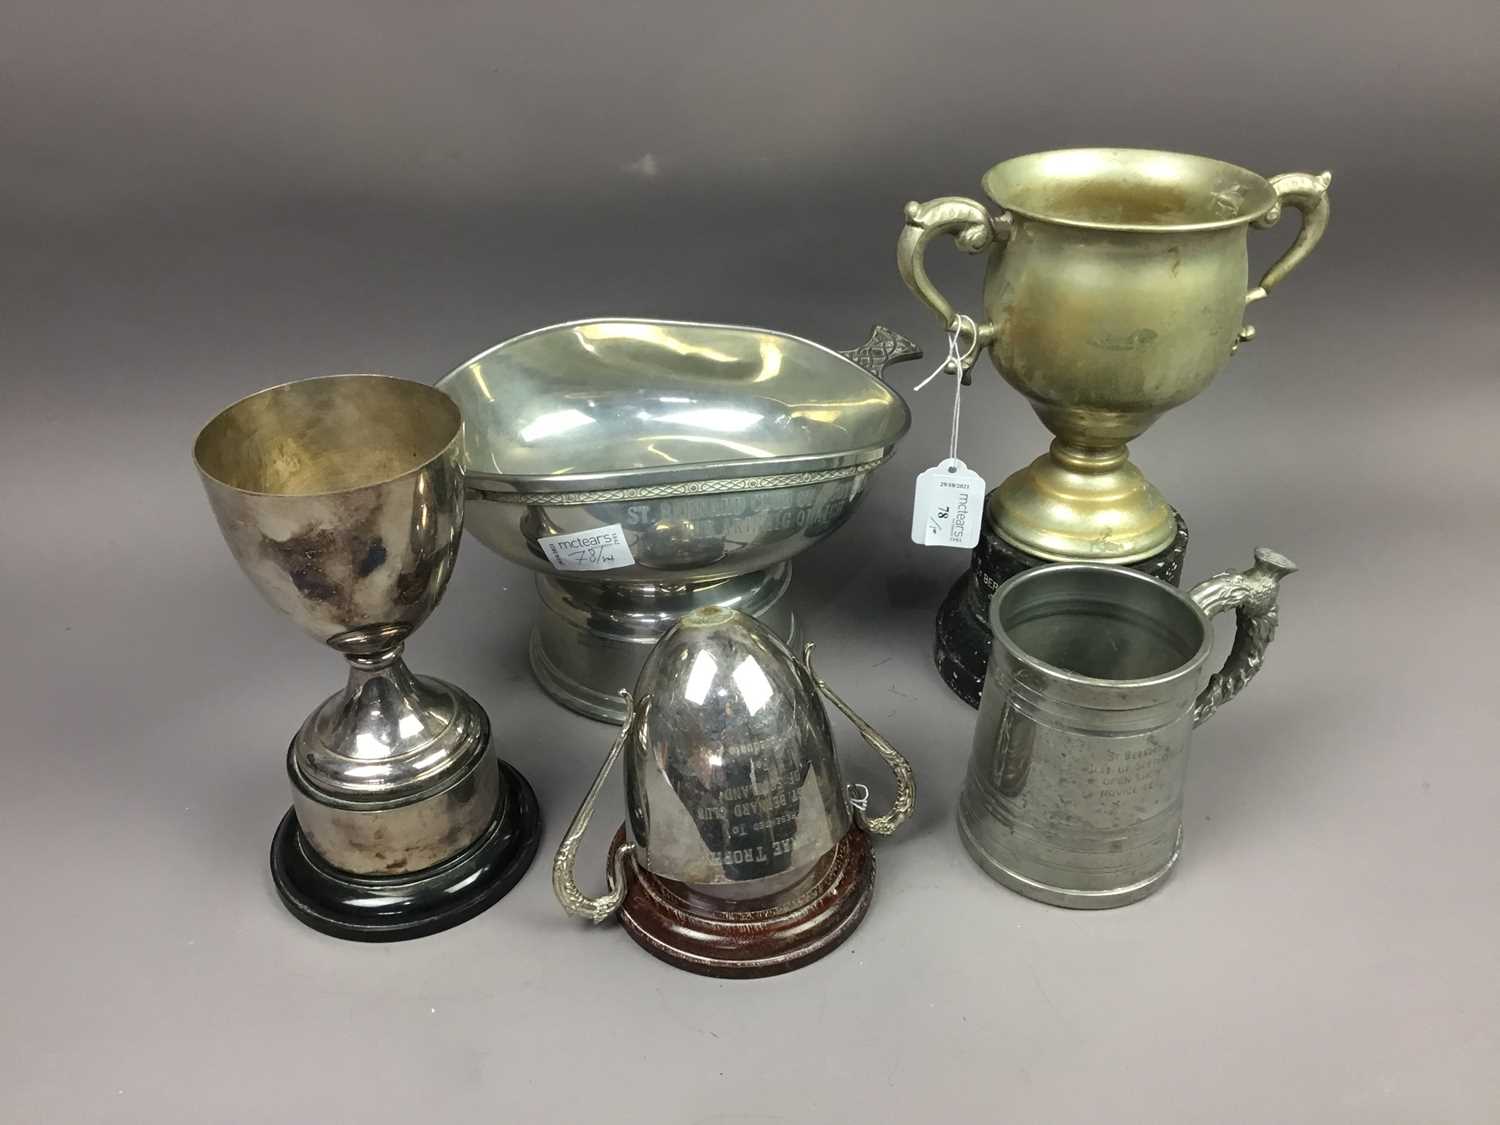 Lot 78 - A COLLECTION OF TROPHIES RELATING TO THE ST. BERNARD CLUB OF SCOTLAND